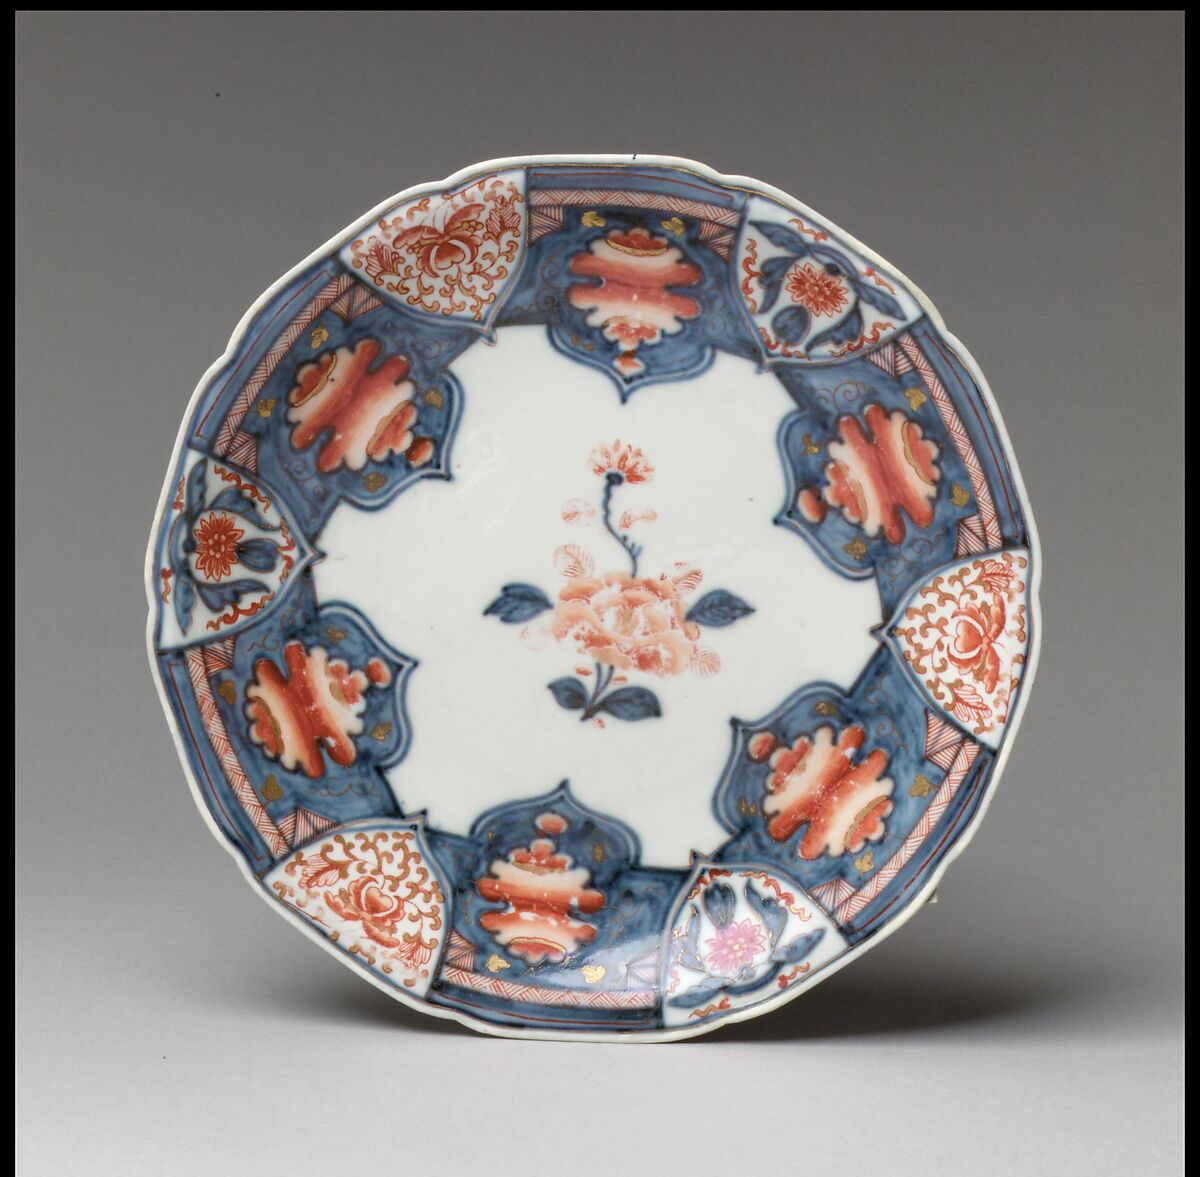 Plate, Possibly made at Imperial Porcelain Manufactory  (Vienna, 1744–1864), Hard-paste porcelain, Austrian, probably Vienna 